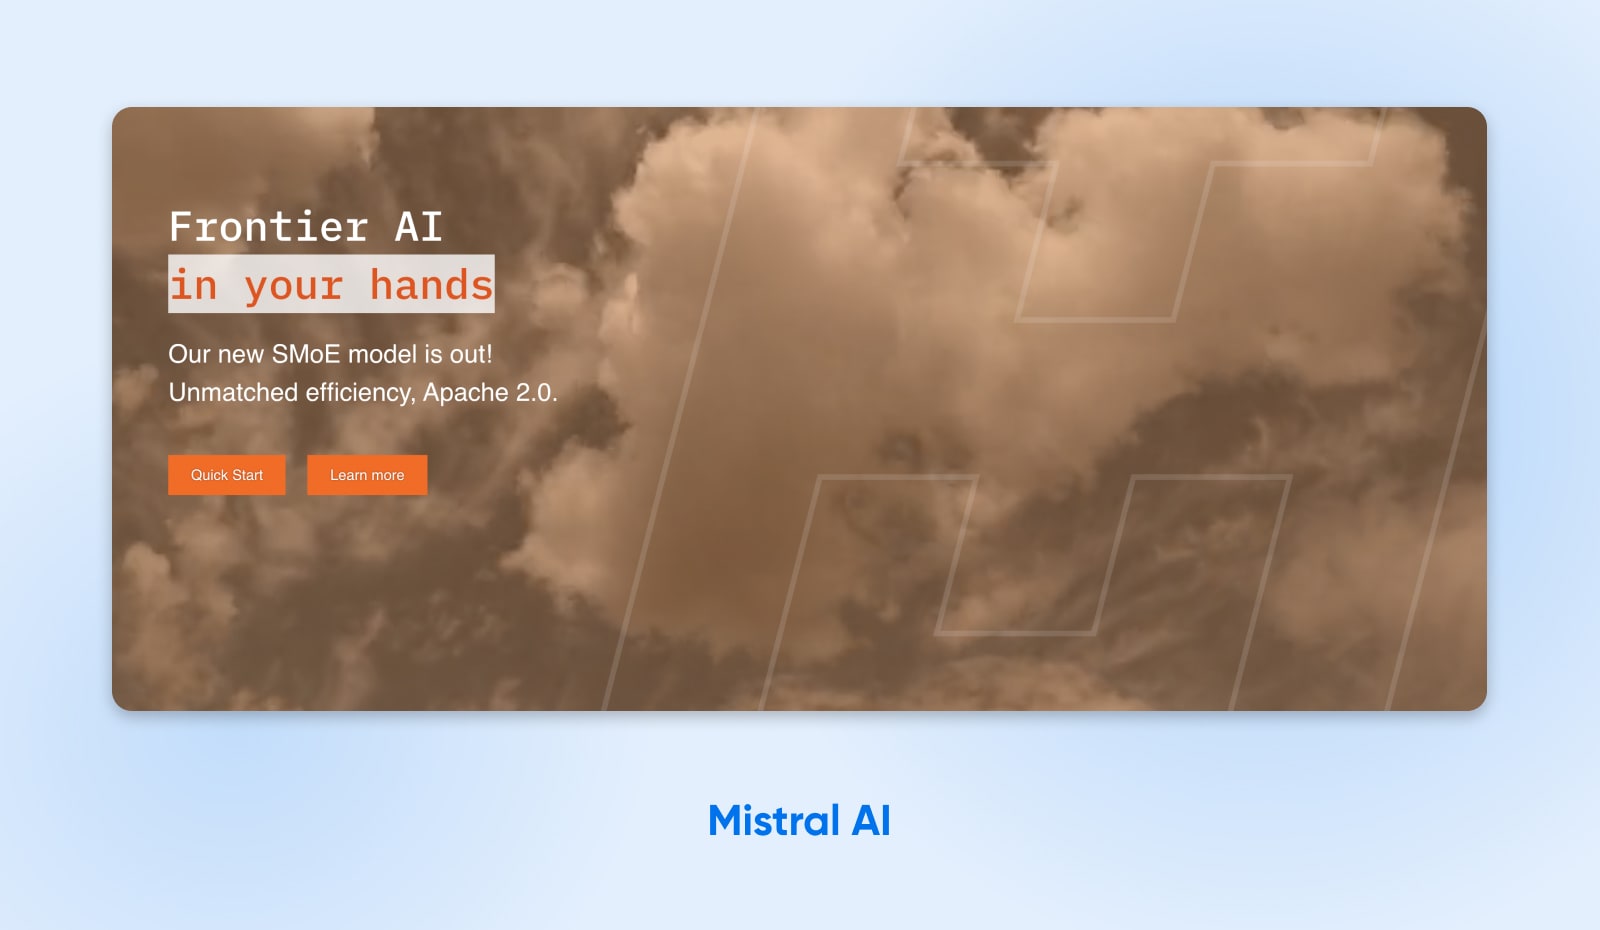 screenshot of frontier AI's homepage with buttons for "quick start" and "learn more" on a backdrop of clouds and sky